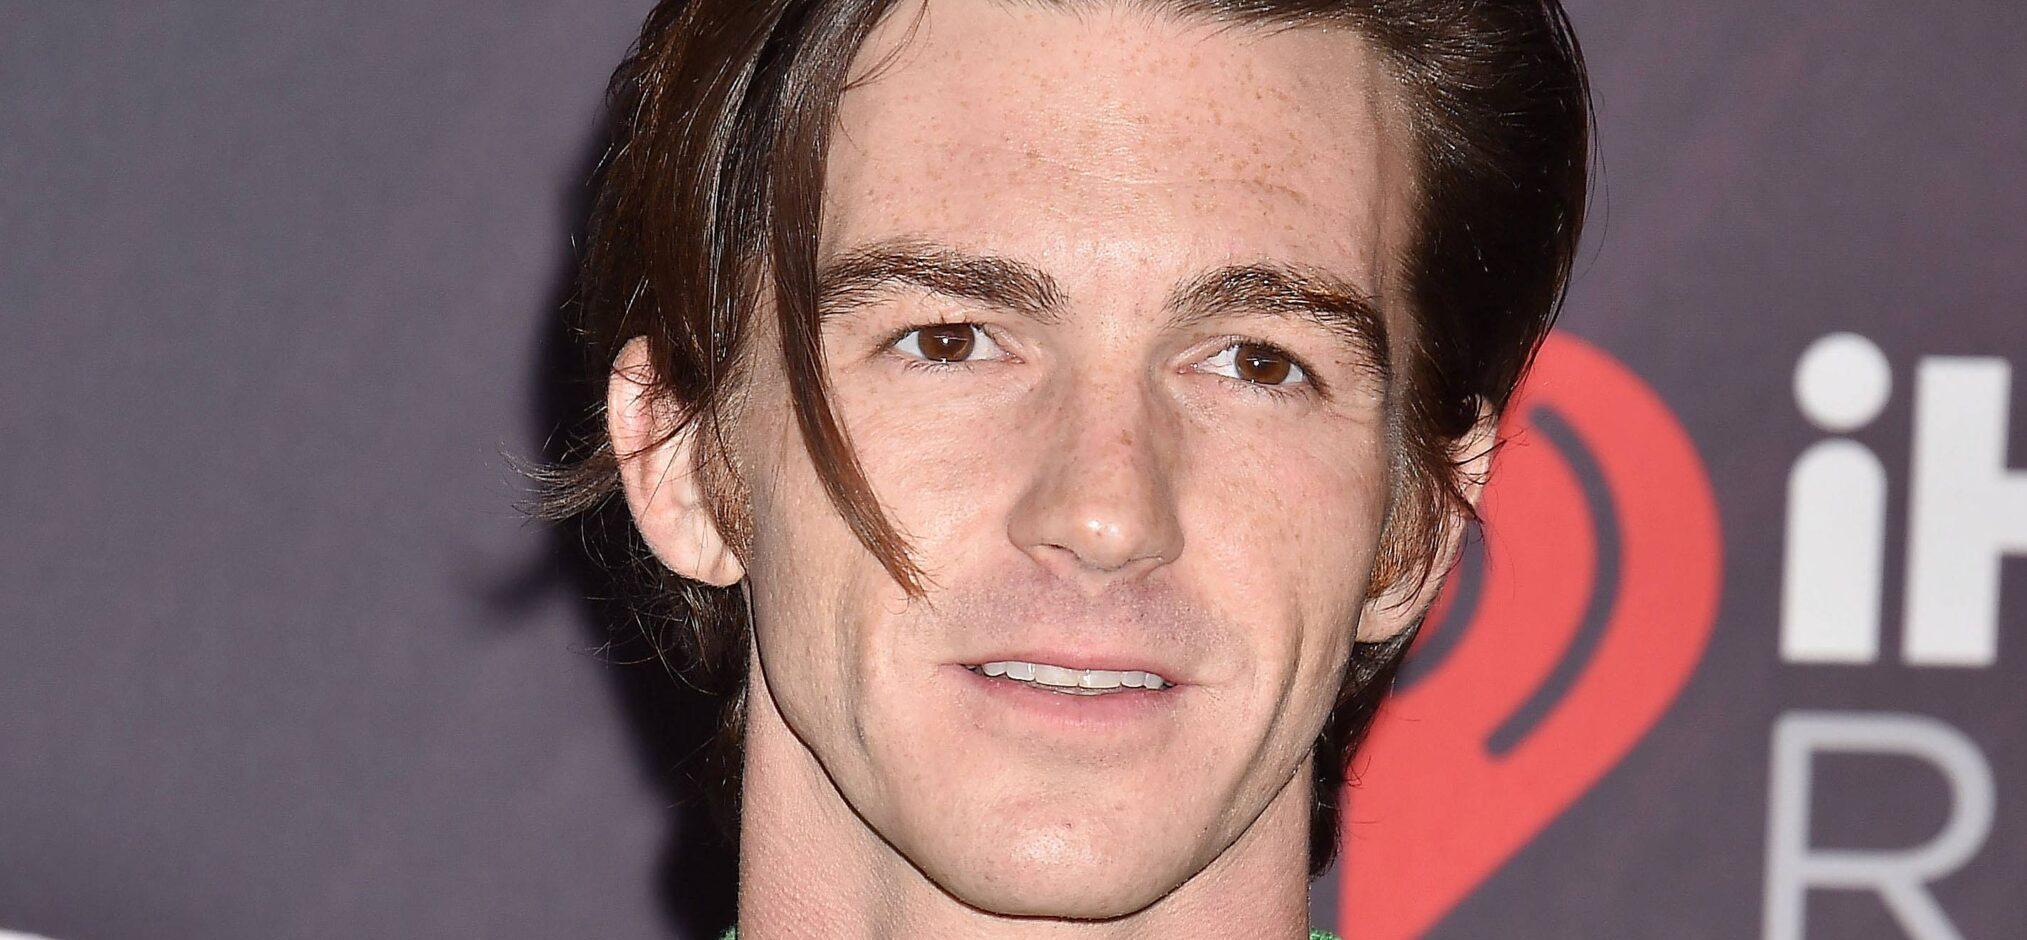 Drake Bell Details 'Brutal' & 'Extensive' Sexual Abuse By Nickelodeon Dialogue Coach